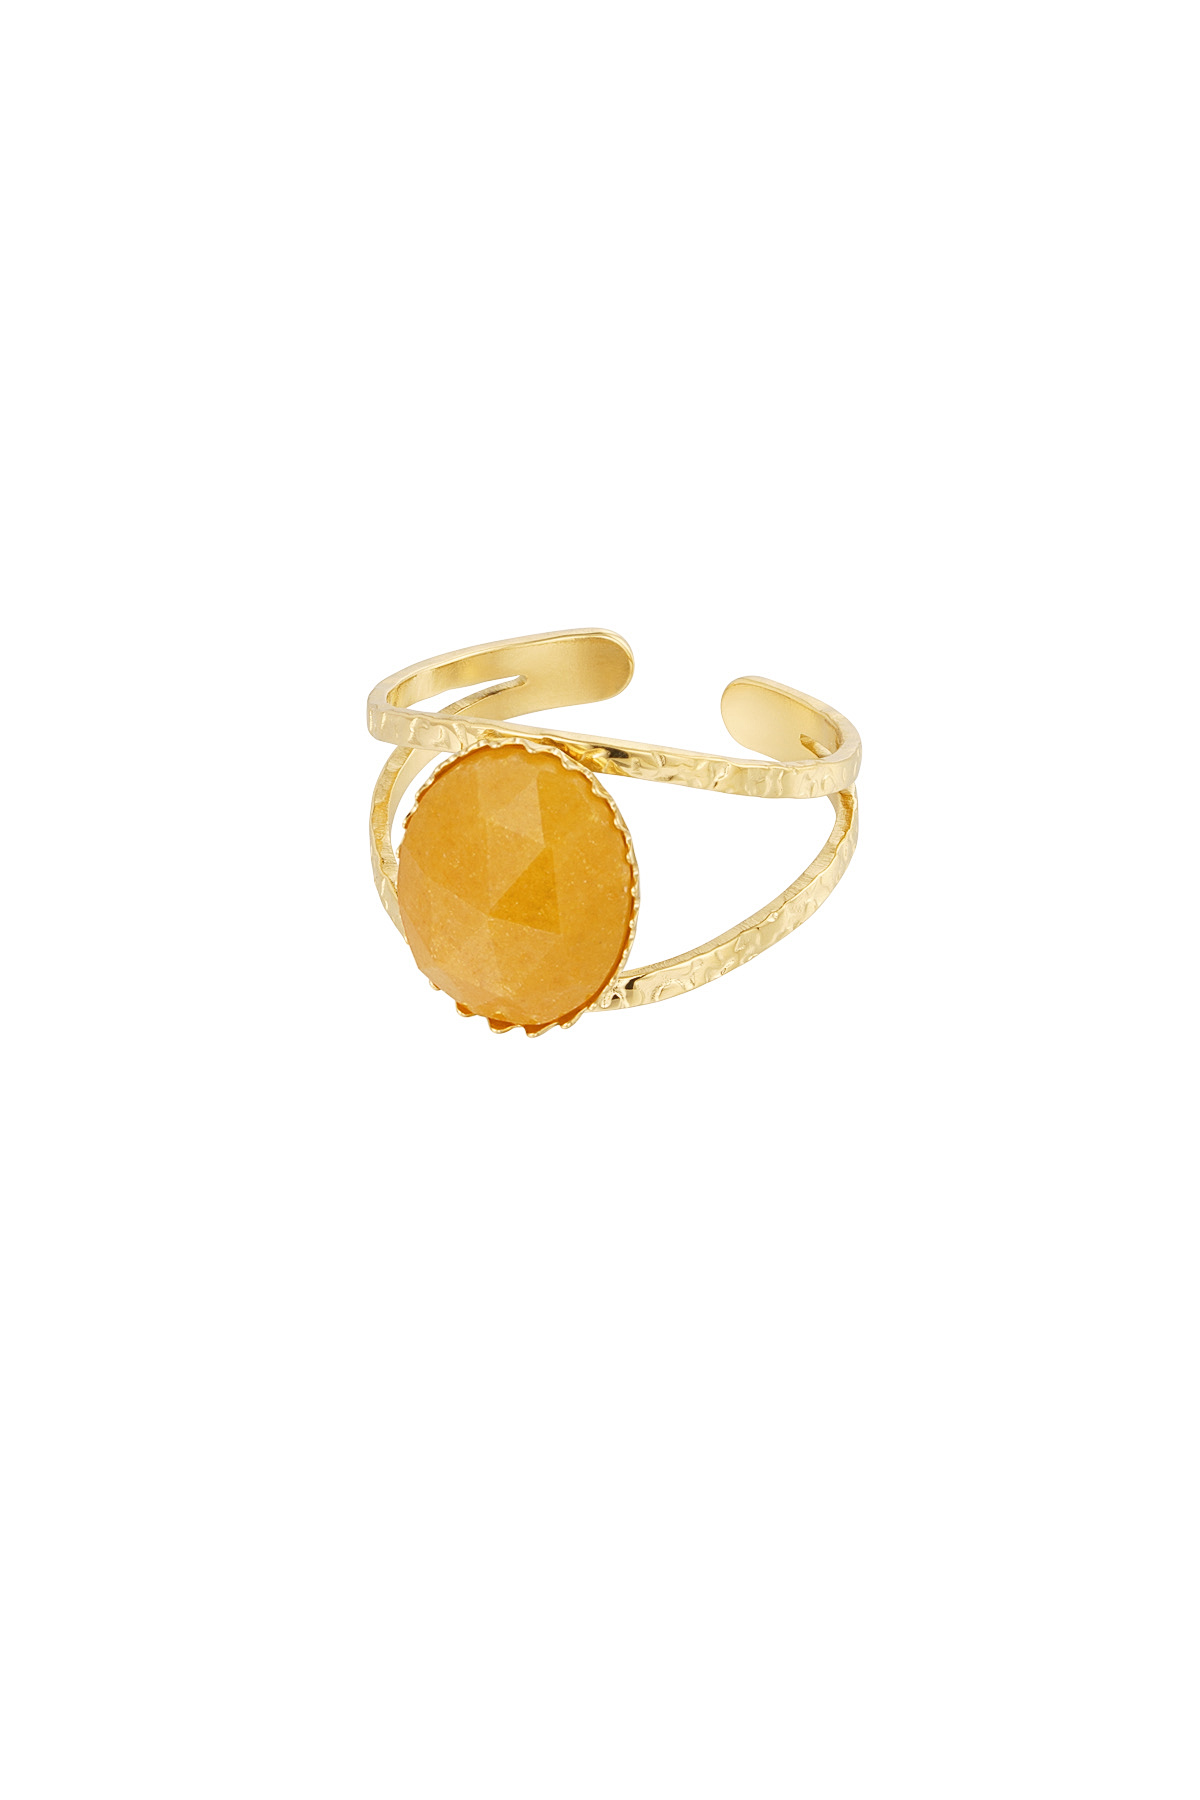 Robuster offener Ring mit Stein - Gold